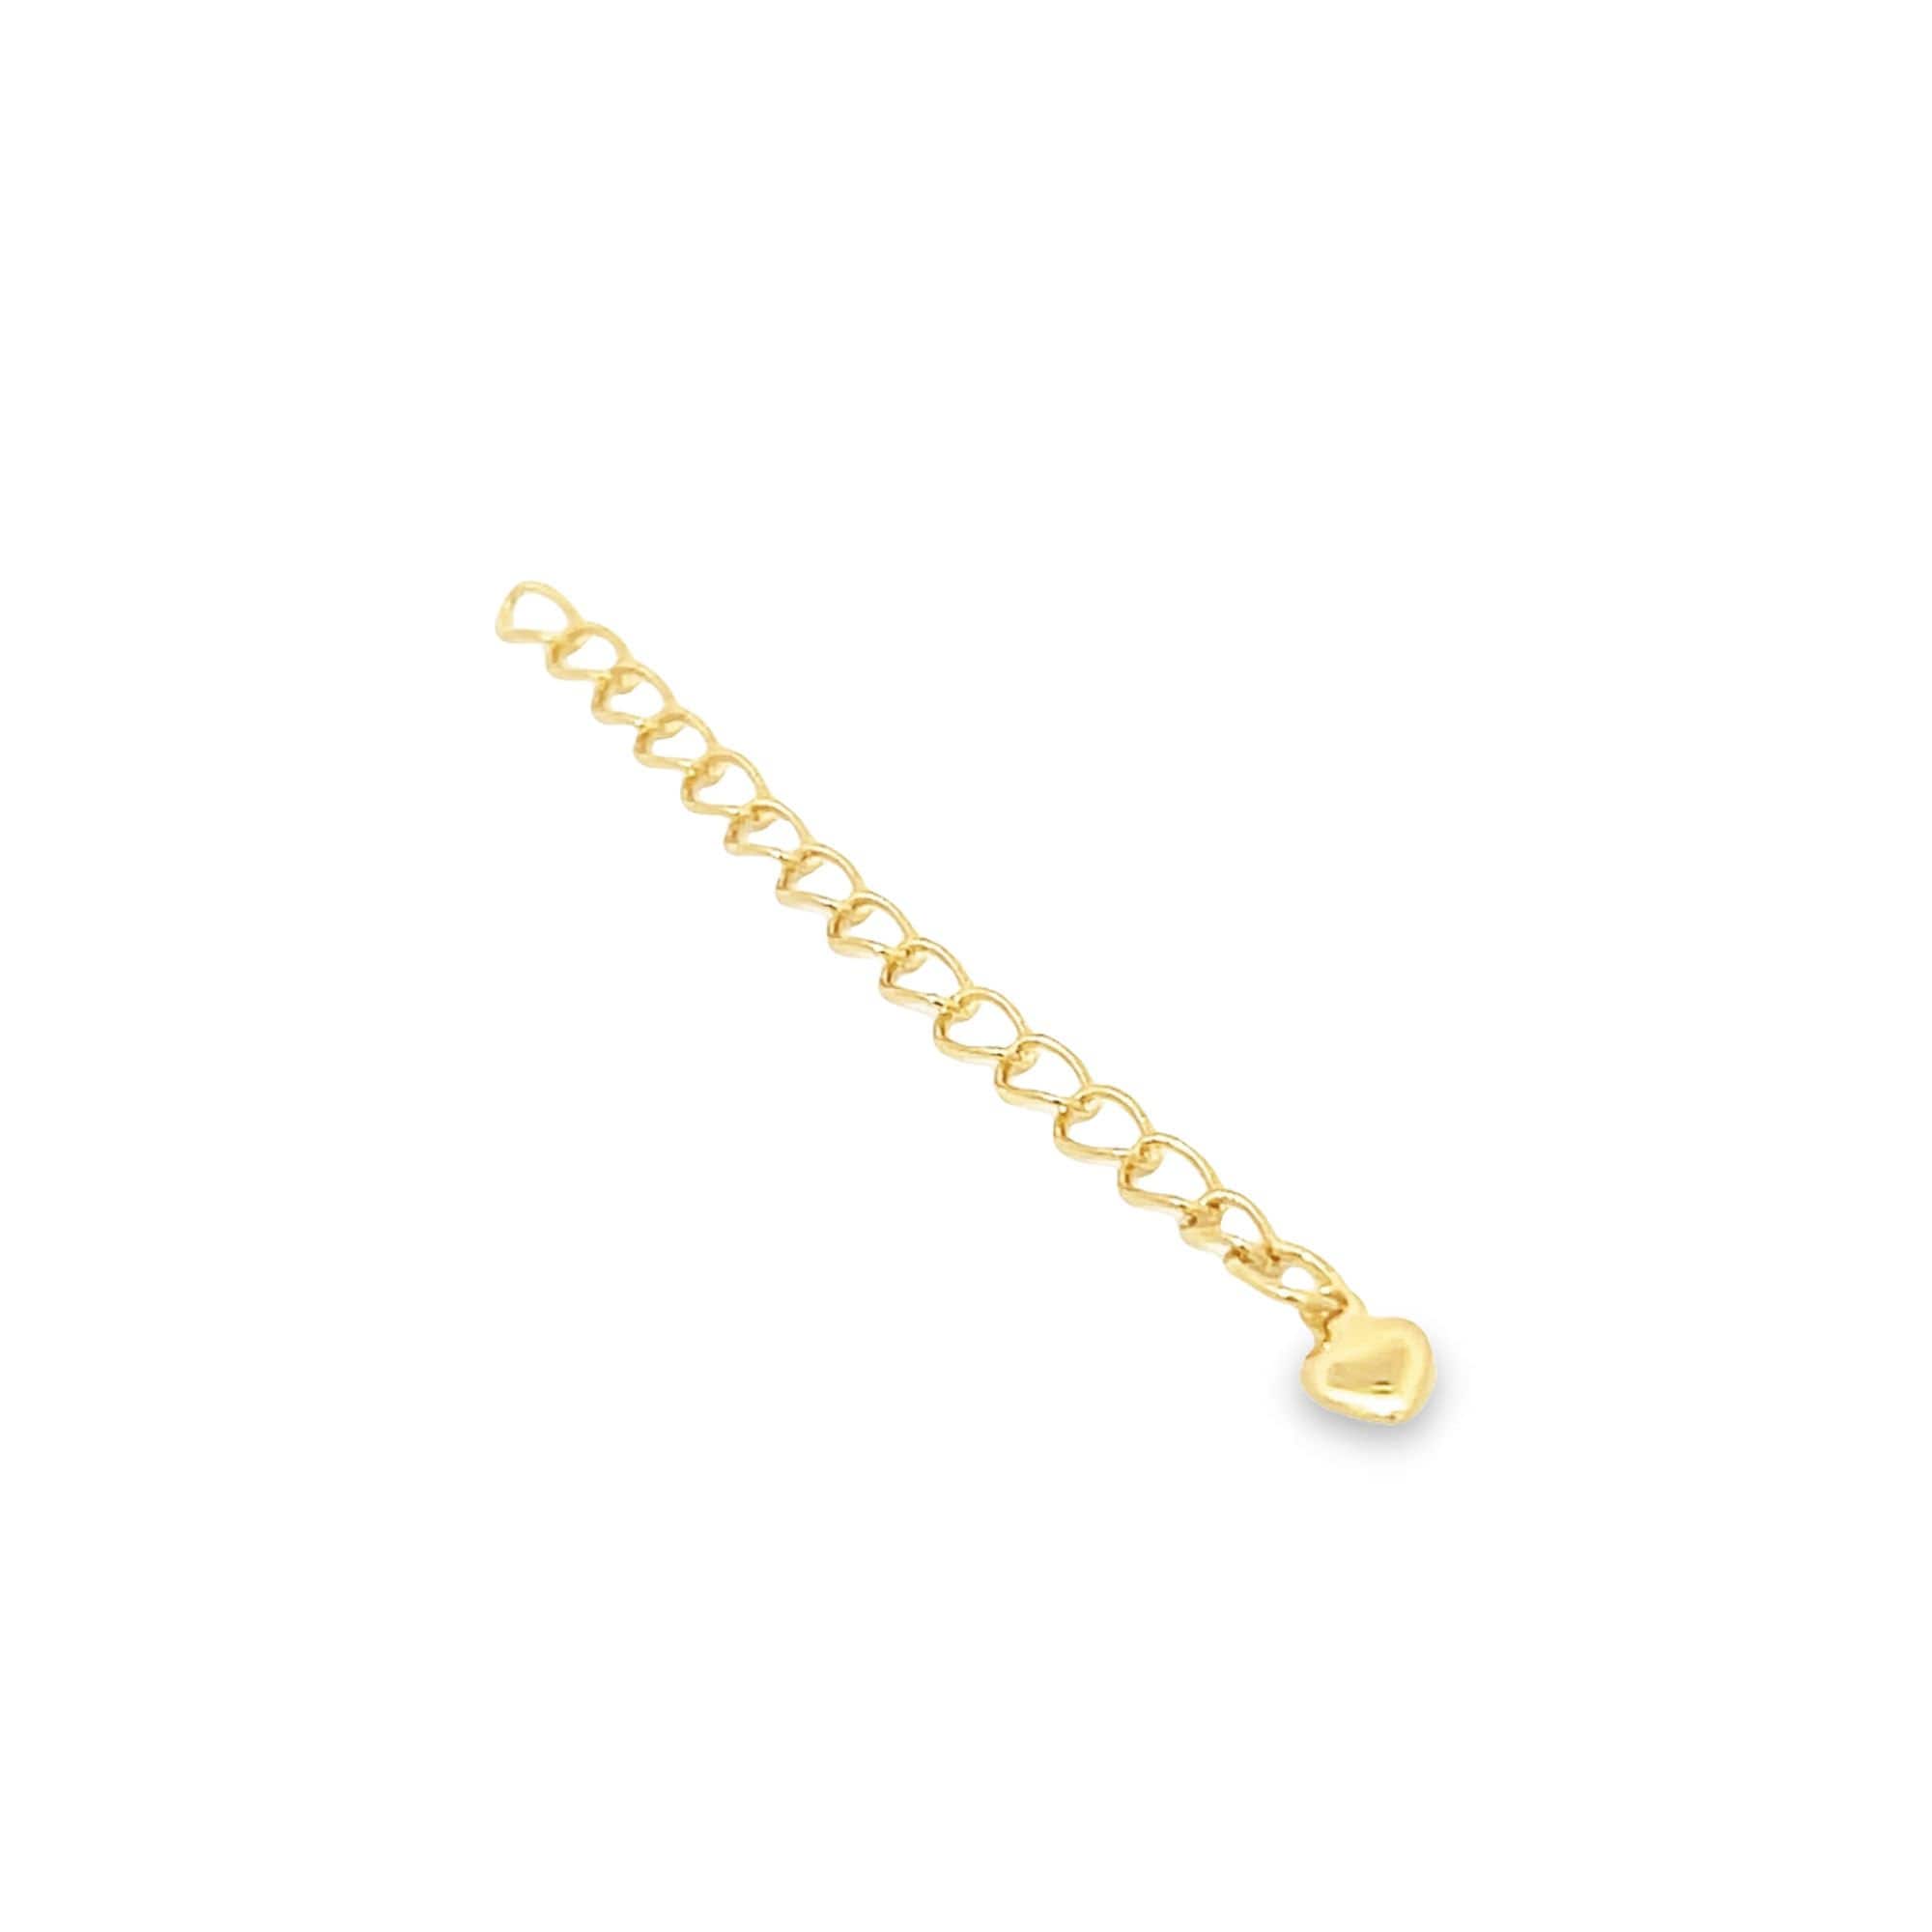 10 Pieces - 16K Gold Plated 2inch Chain Extender Jewelry Supply Craft  Supplies Necklace Extender Extension Chain Bracelet Extender - 10PEXT (Gold)